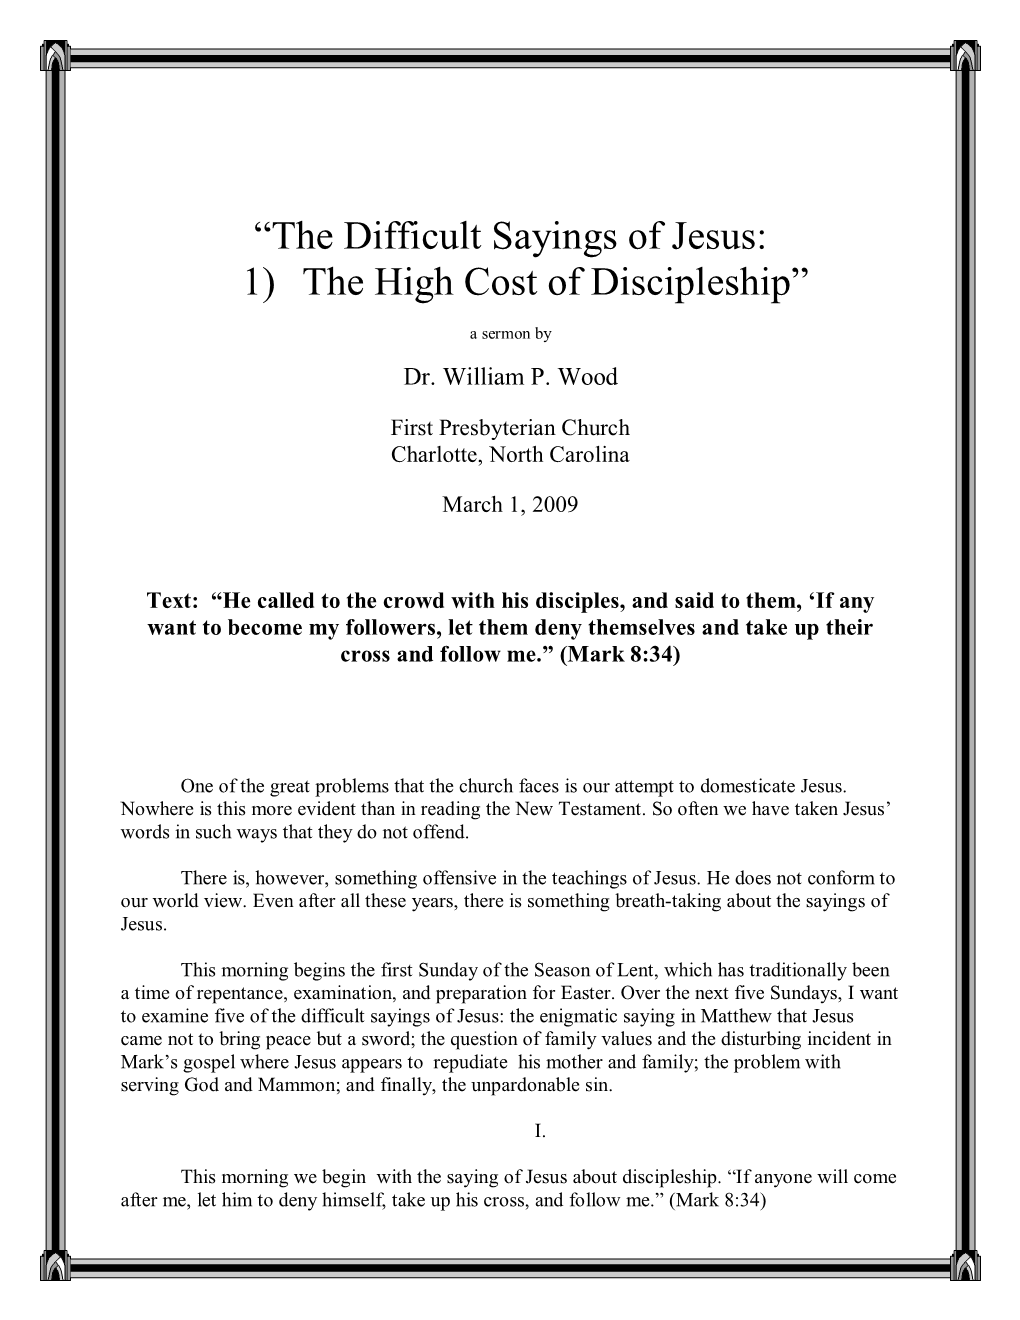 “The Difficult Sayings of Jesus: 1) the High Cost of Discipleship”